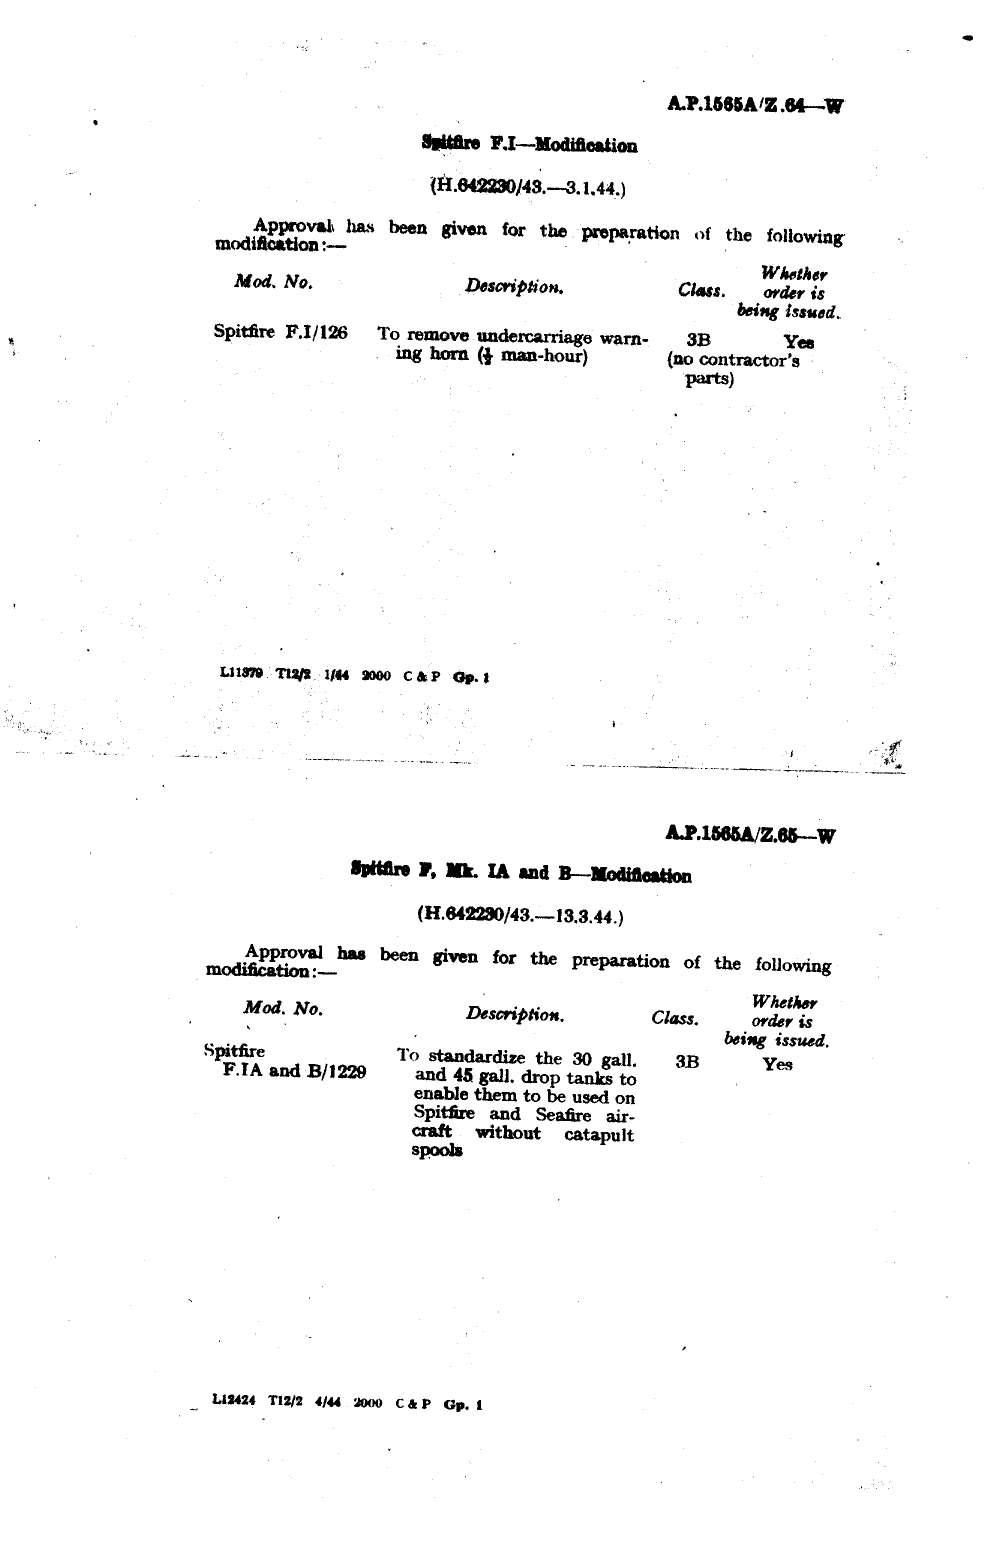 Sample page 1 from AirCorps Library document: Spitfire F Mk. IA and B Modification 1229